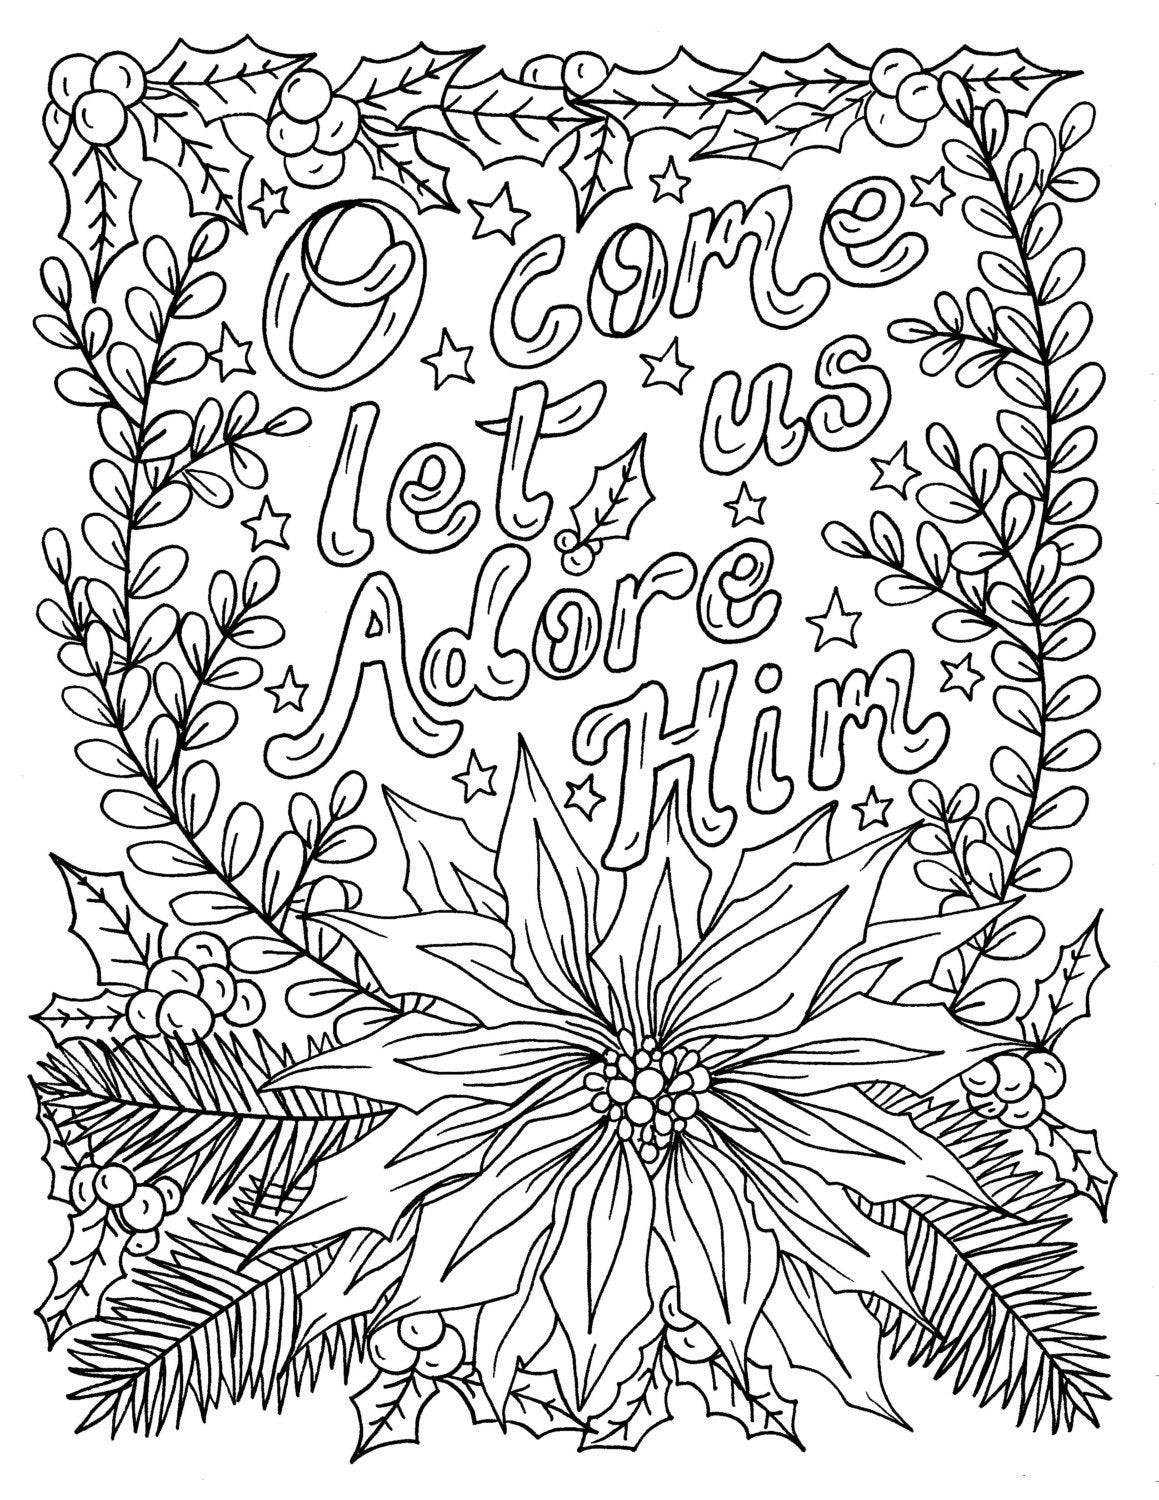 Religious Coloring Pages For Adults
 Christian Christmas Coloring Page Adult Coloring Books Art